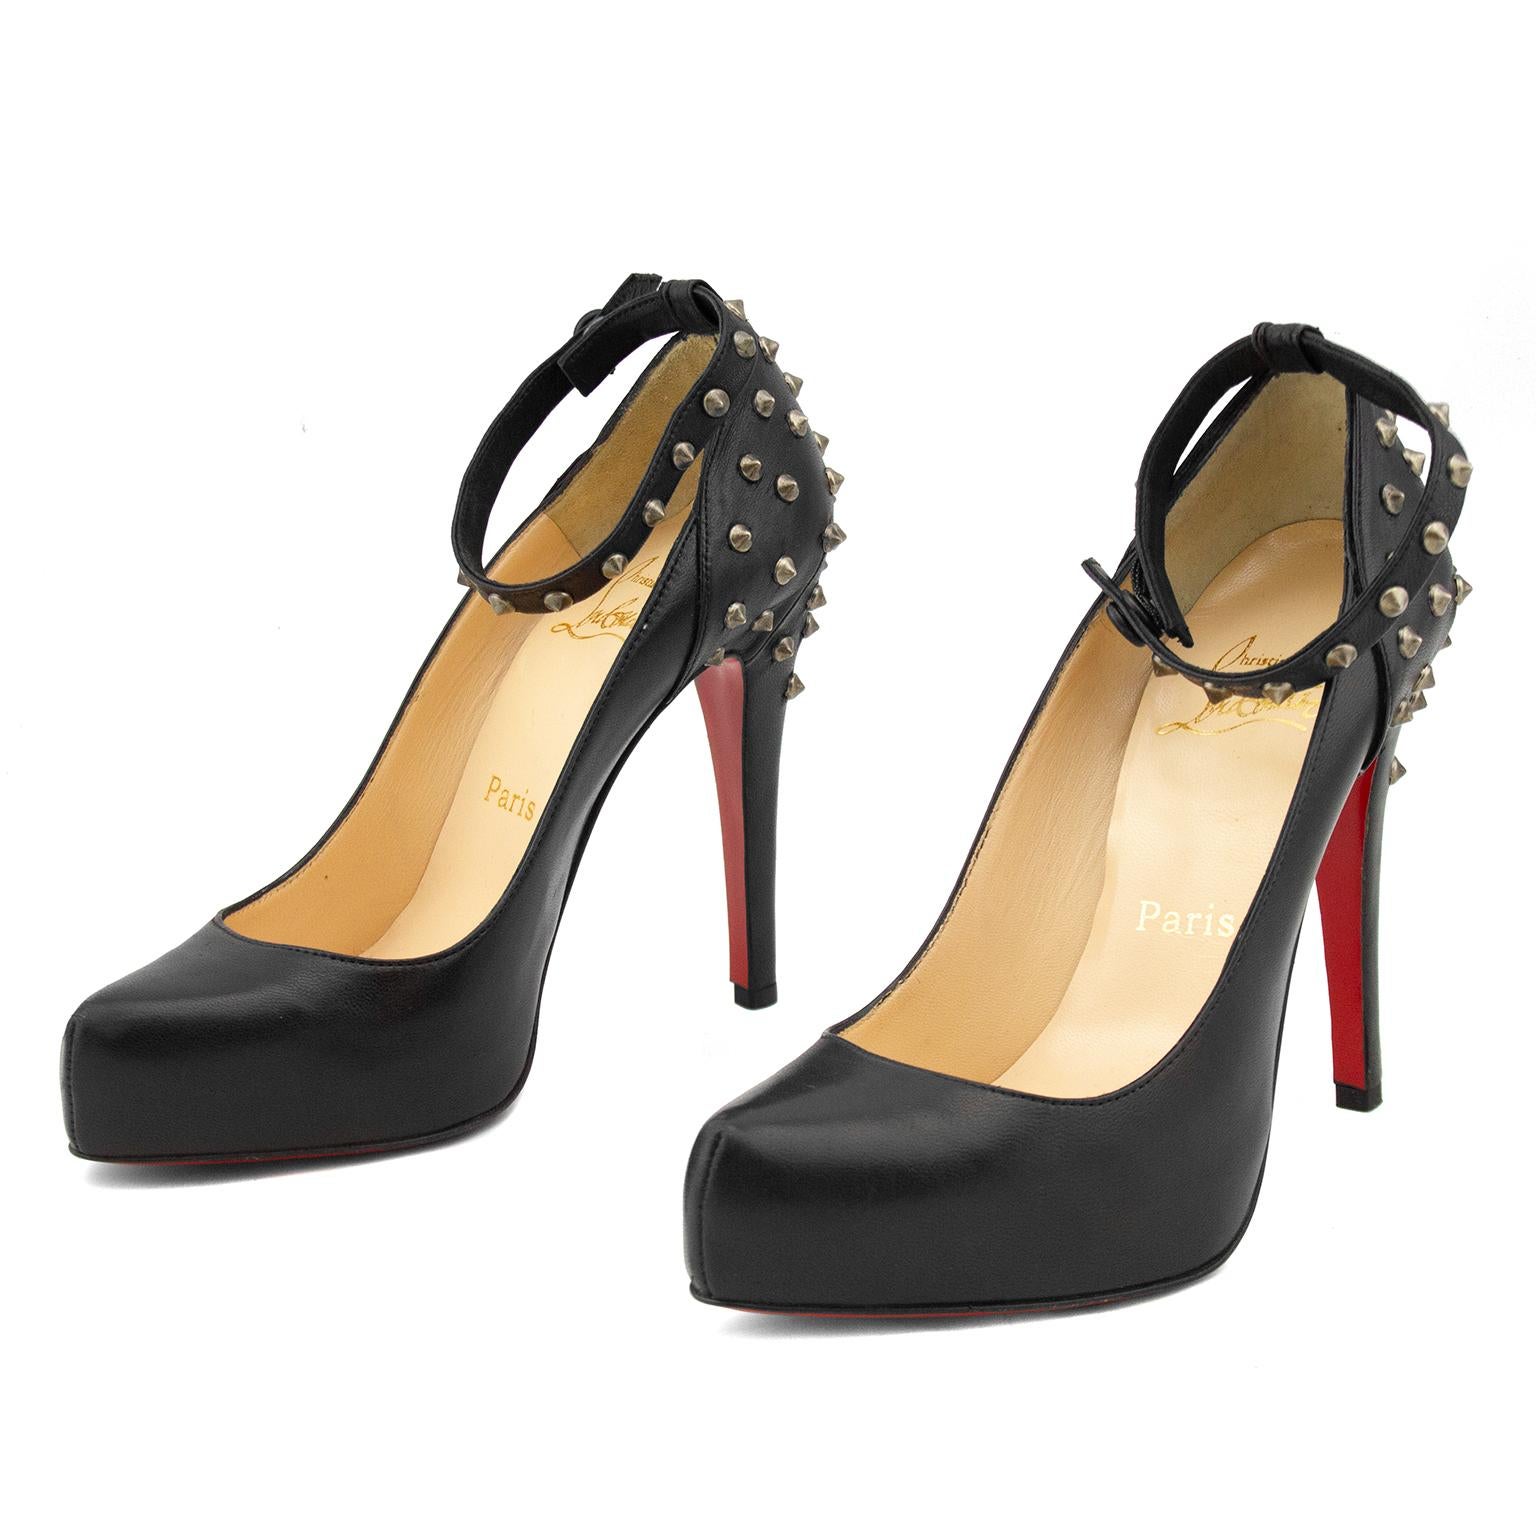 Unworn Christina Louboutin extreme high heels from the early 2000's. Supple black leather with silver studs up the heel and along the ankle strap. Excellent condition - the iconic Louboutin red soles have no wear. Size 37.5